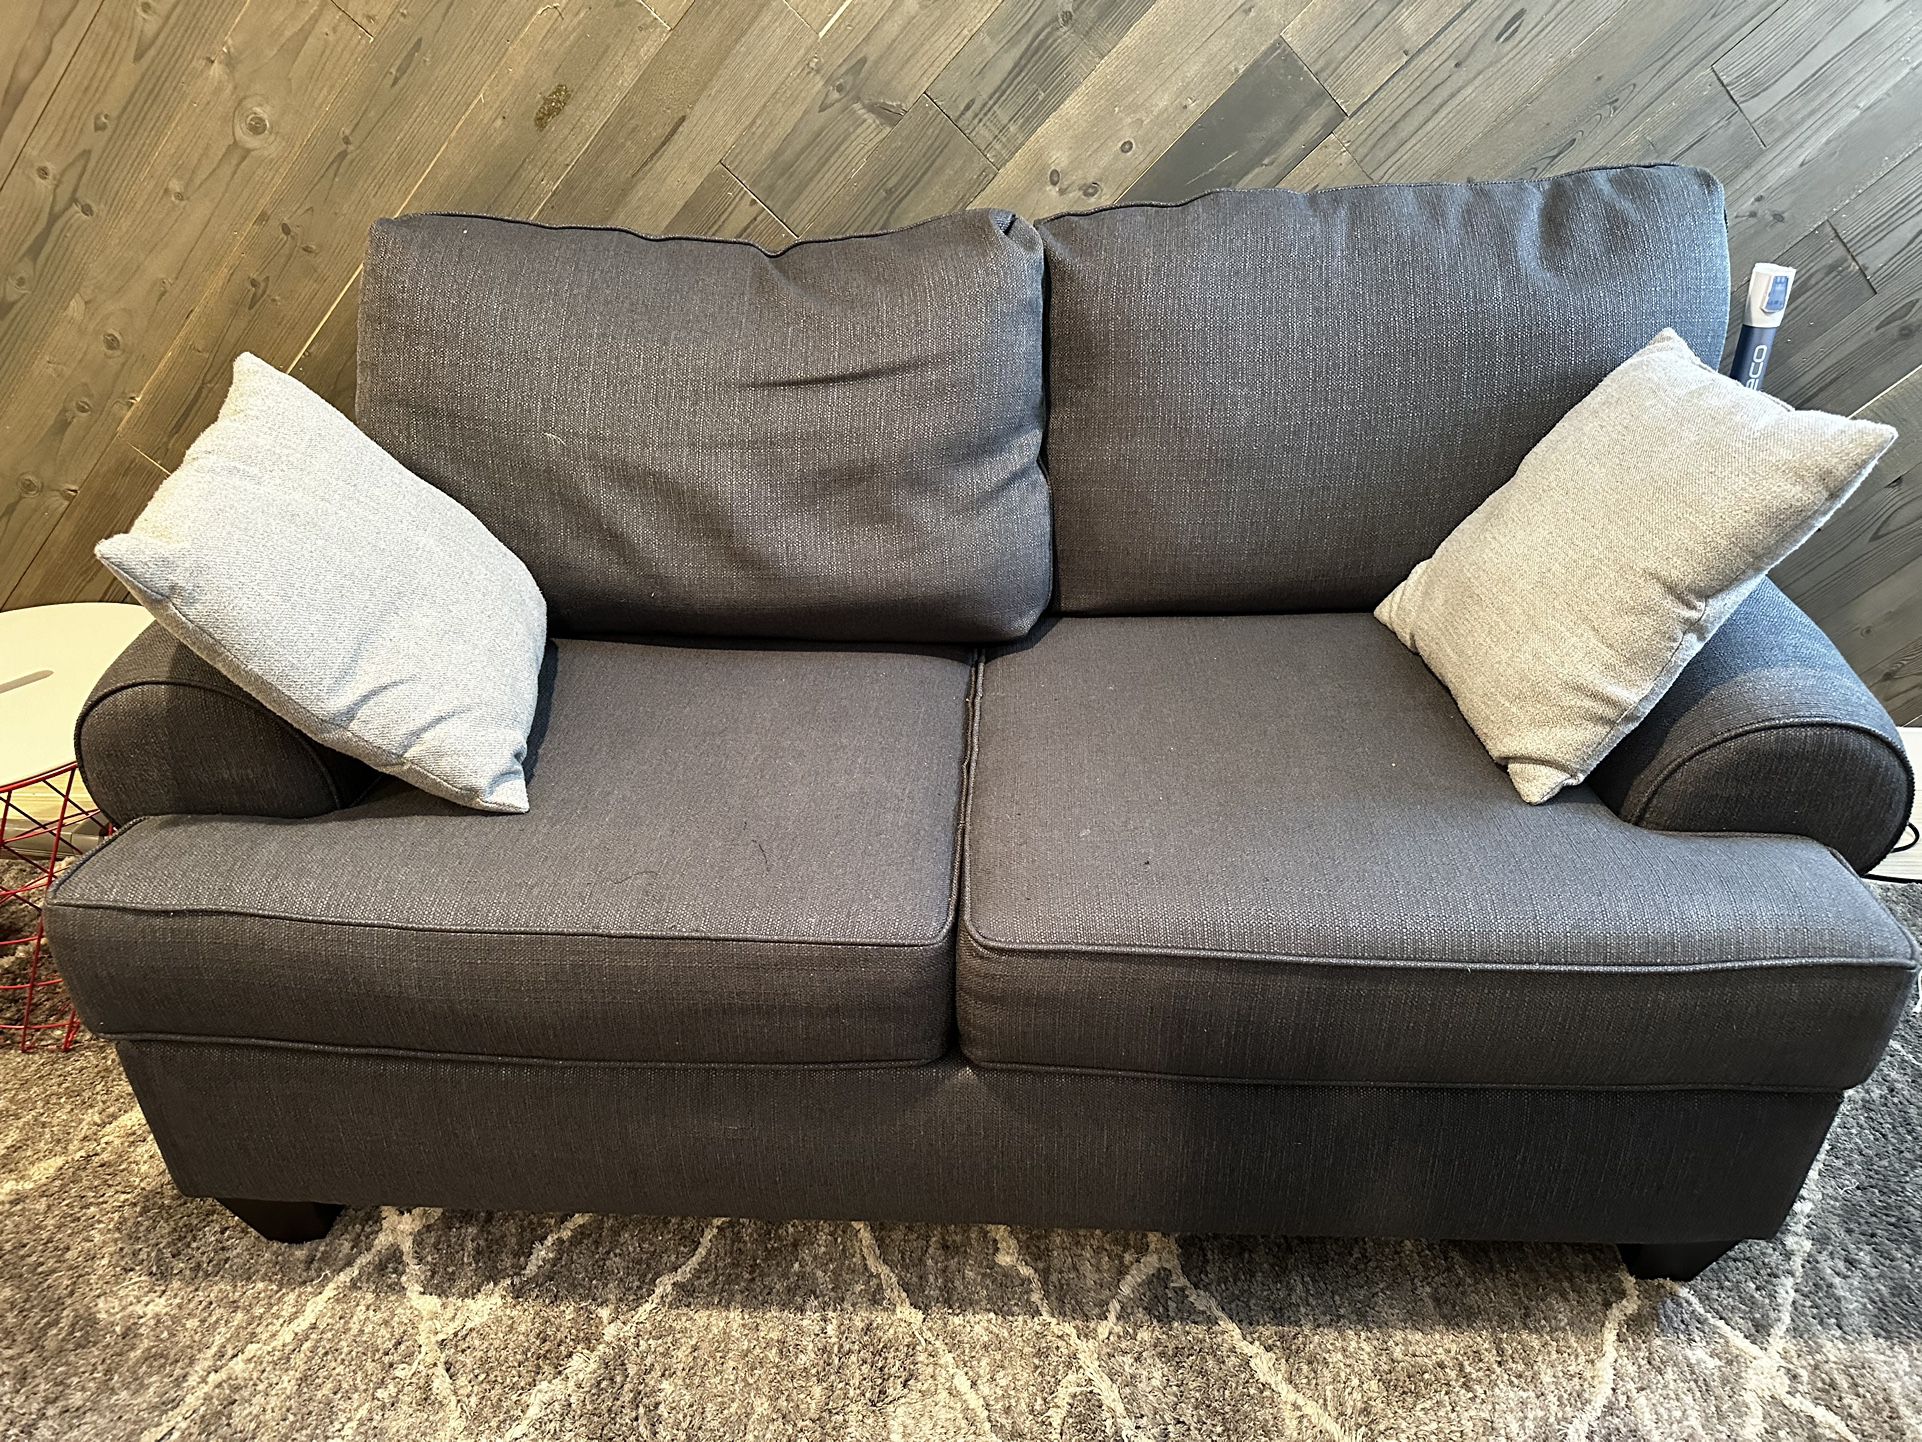 MOVING/MUST SELL- Modern Loveseat in Charcoal Fabric